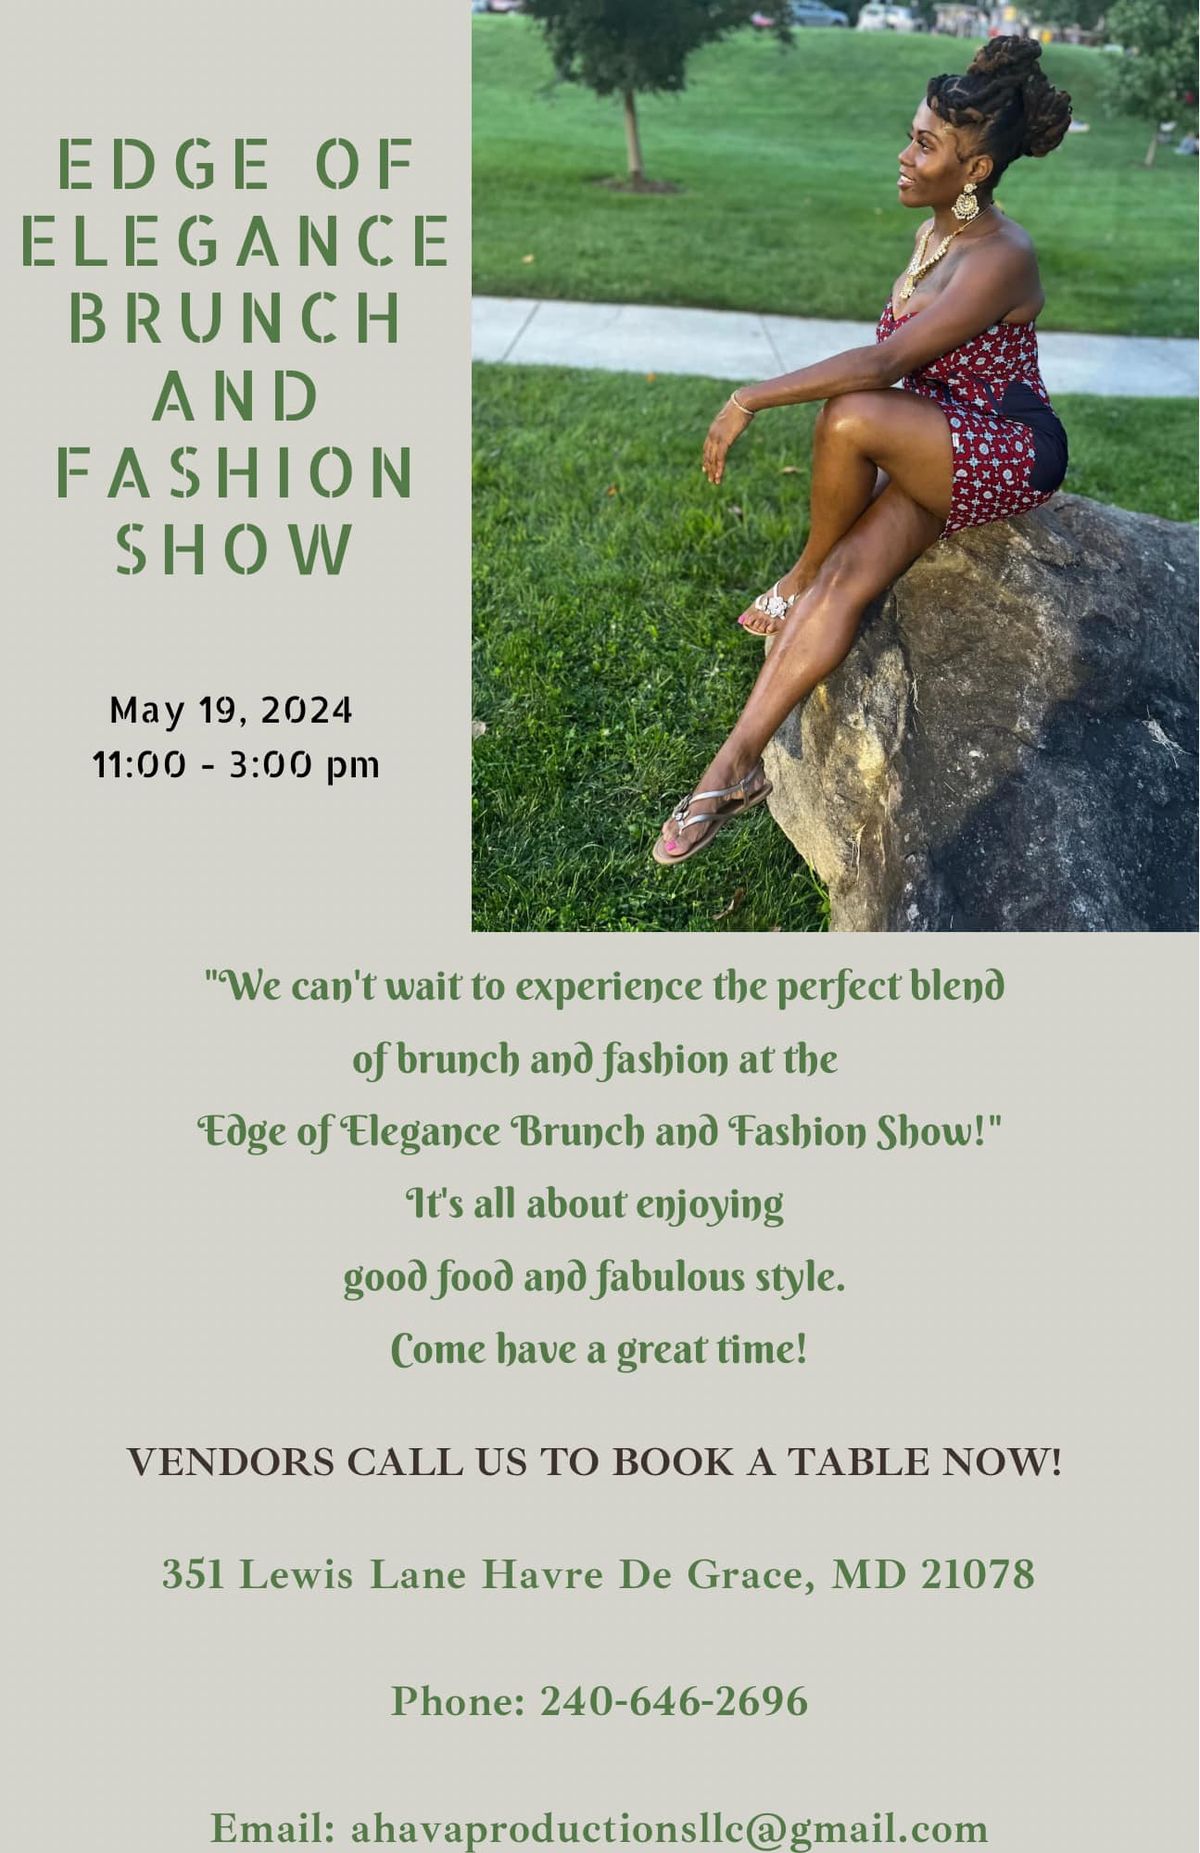 Edge of Elegance Brunch and Fashion Show 